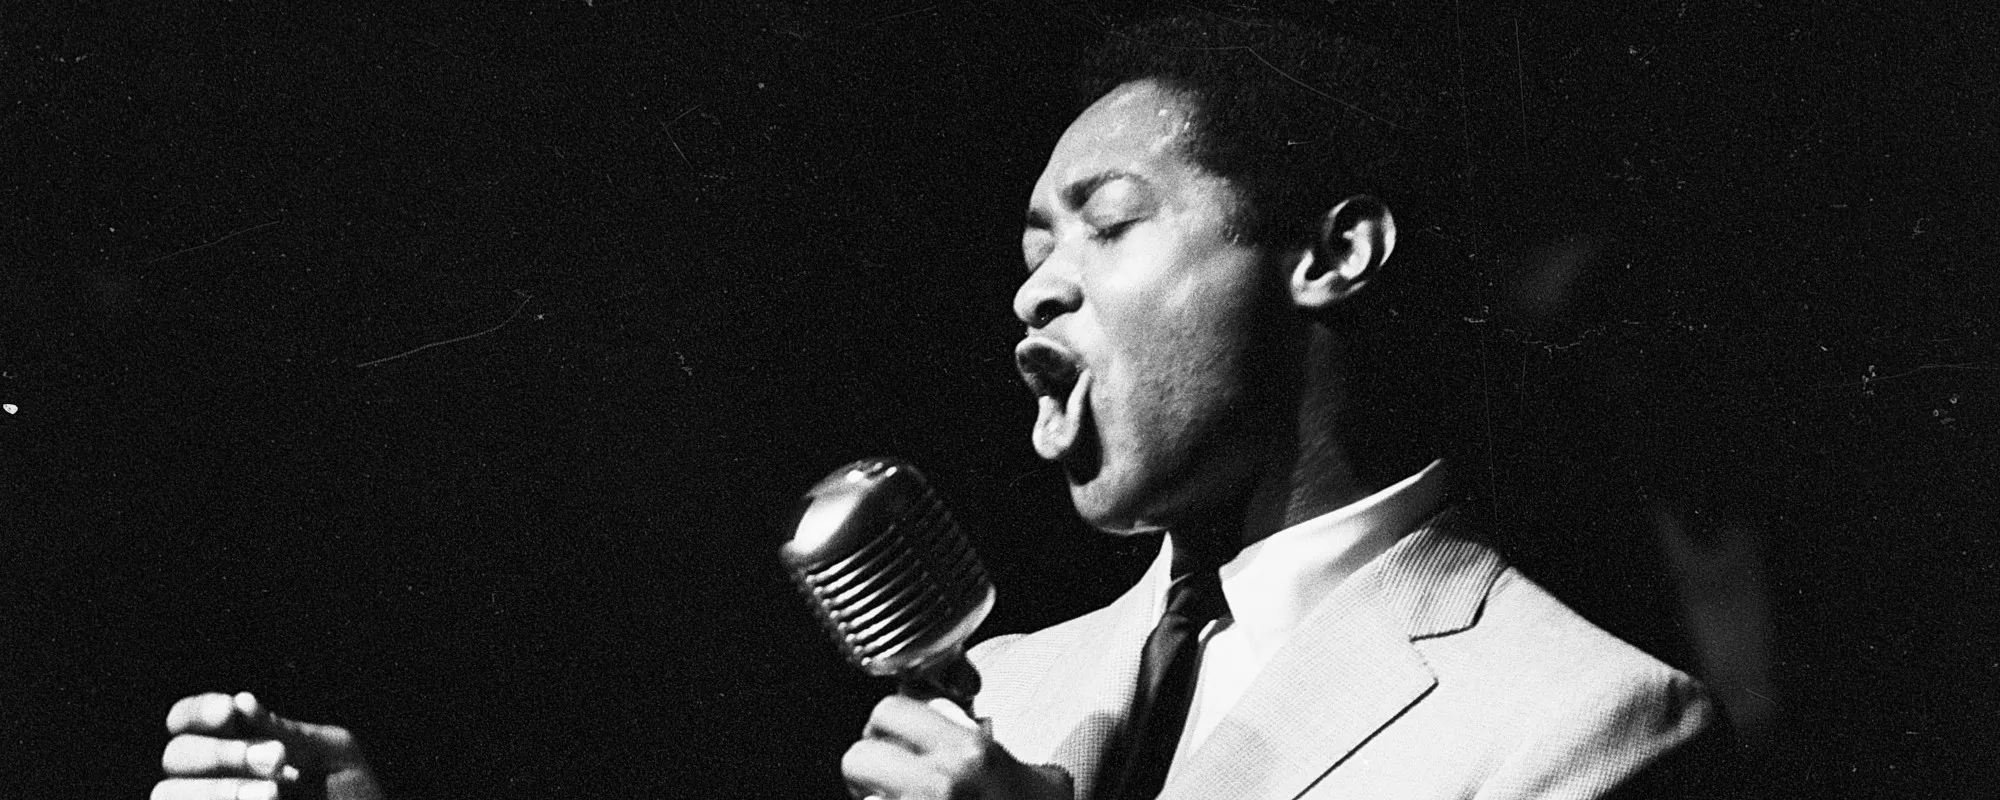 3 More Songs You Didn’t Know Sam Cooke Wrote for Other Artists